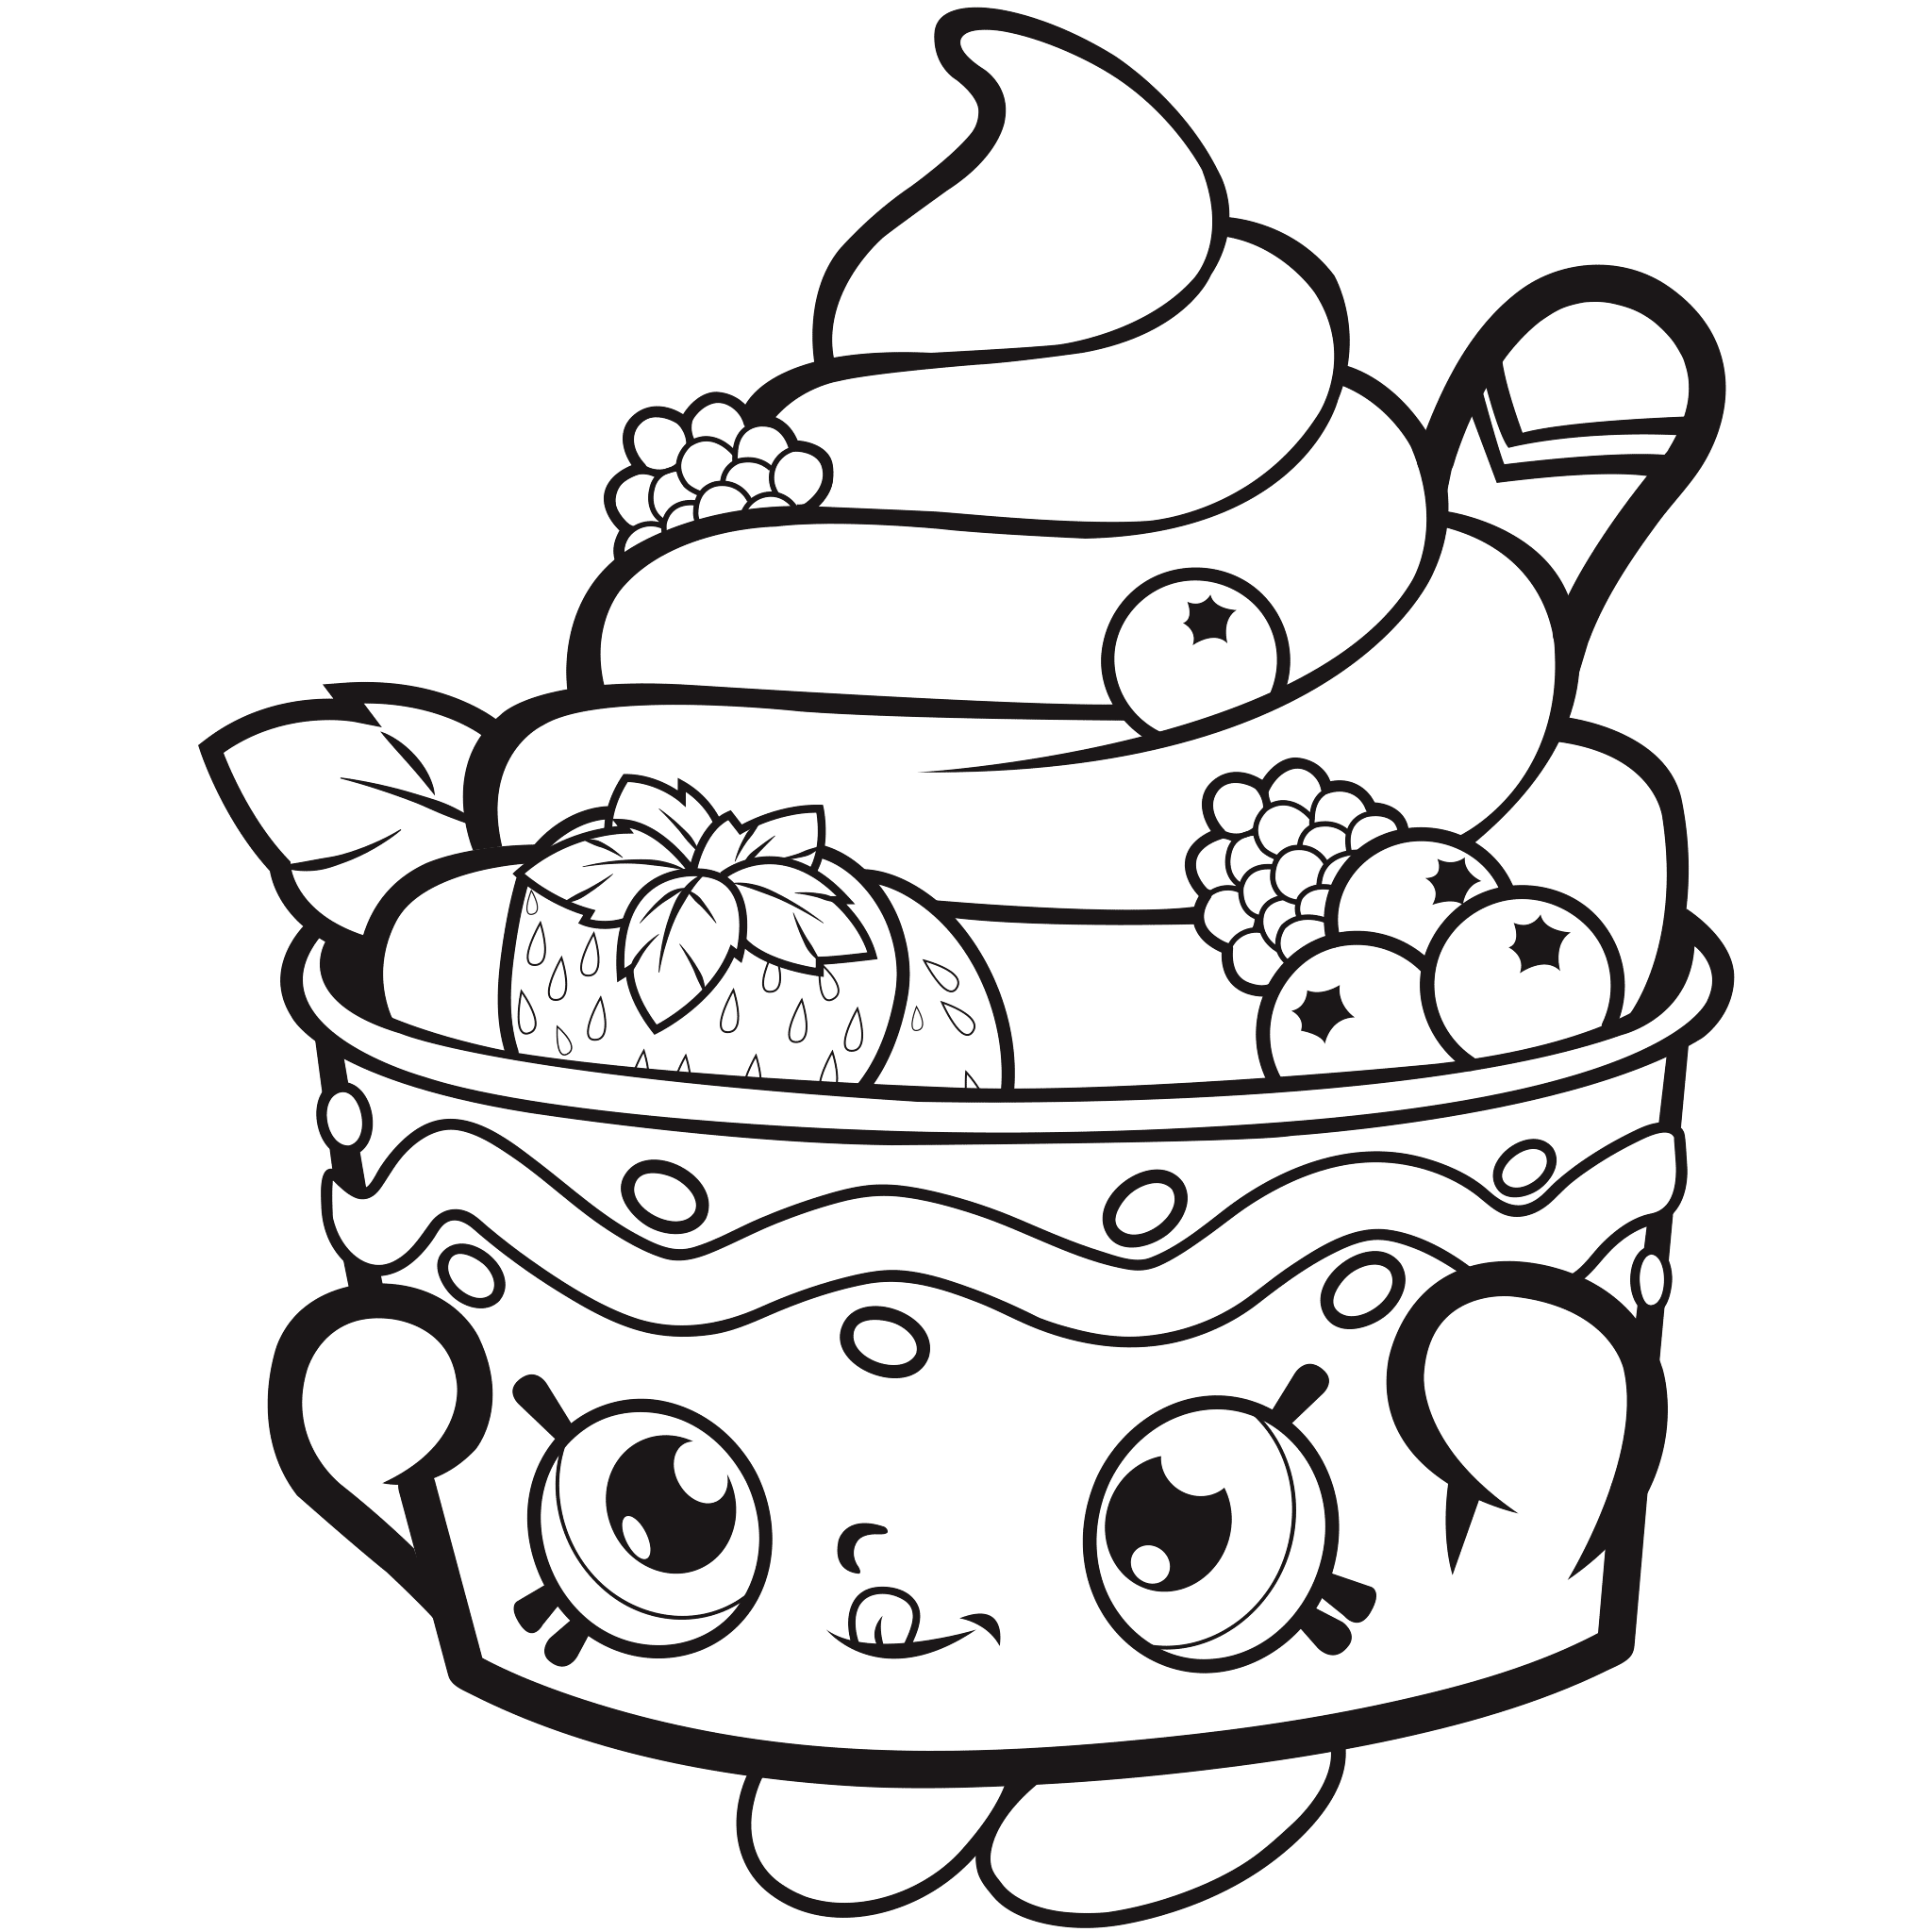 475 Animal Cute Shopkin Coloring Pages with disney character